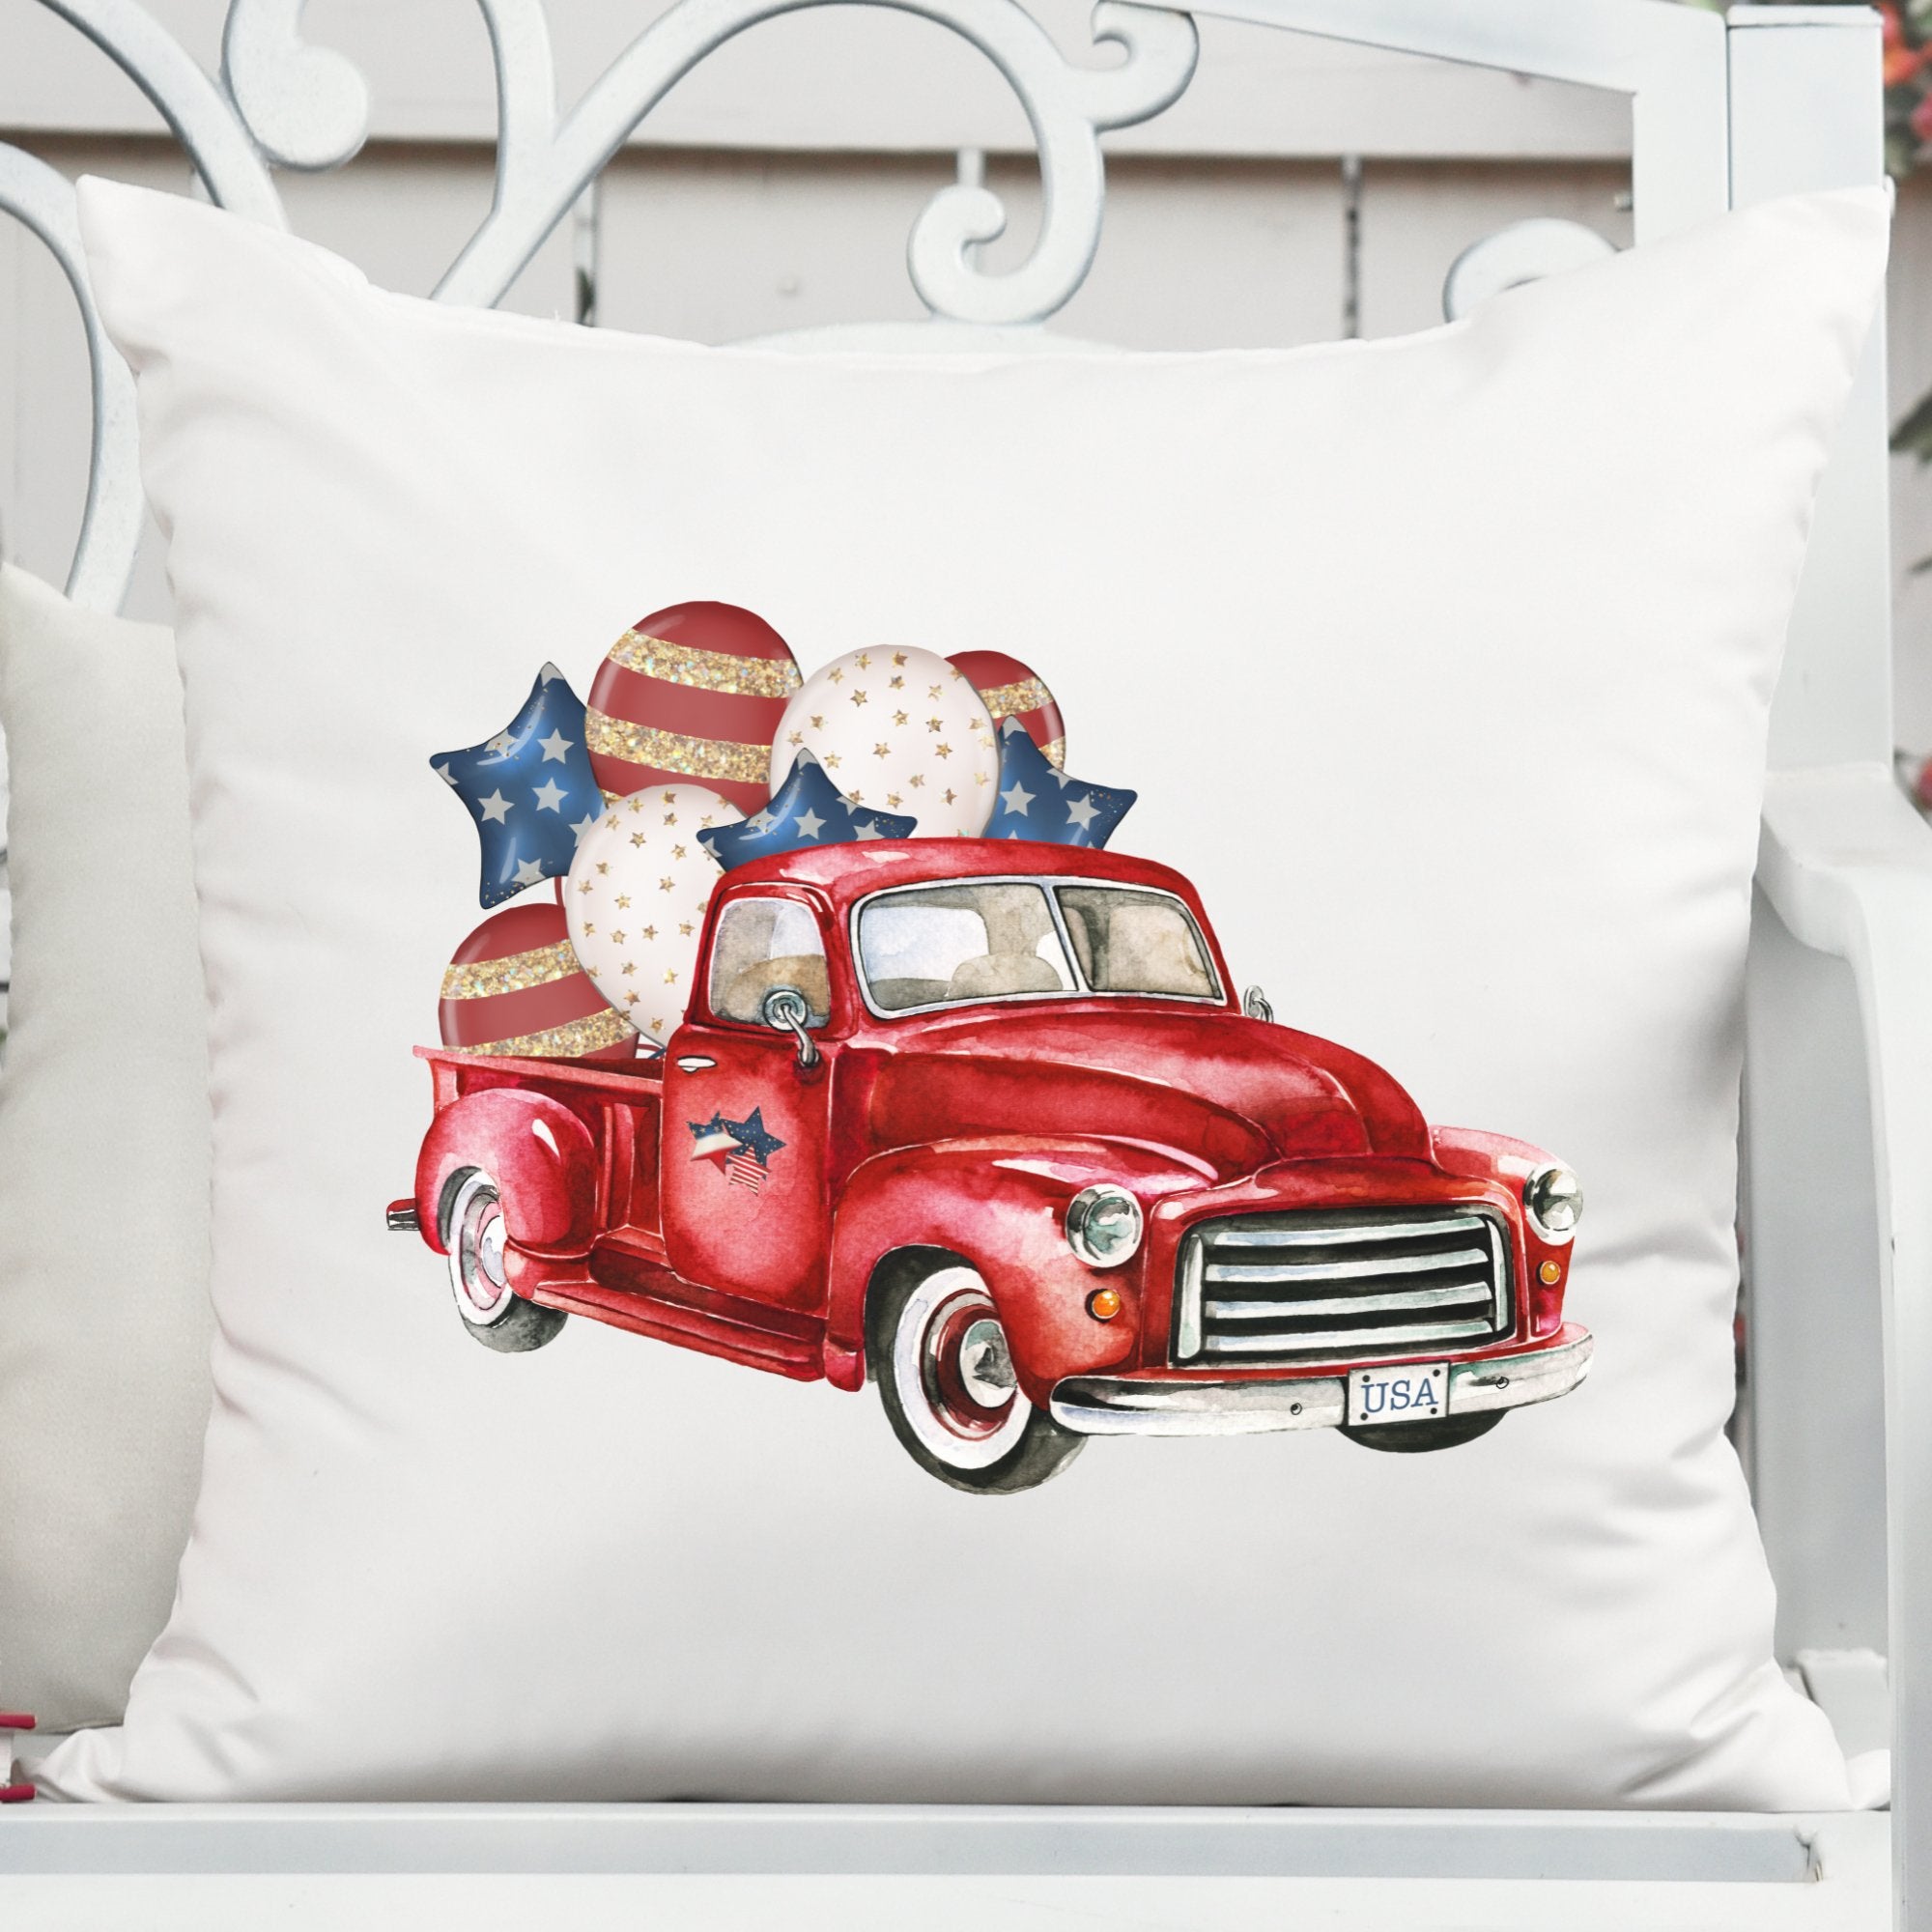 4th of July Pillow Cover - Trendznmore